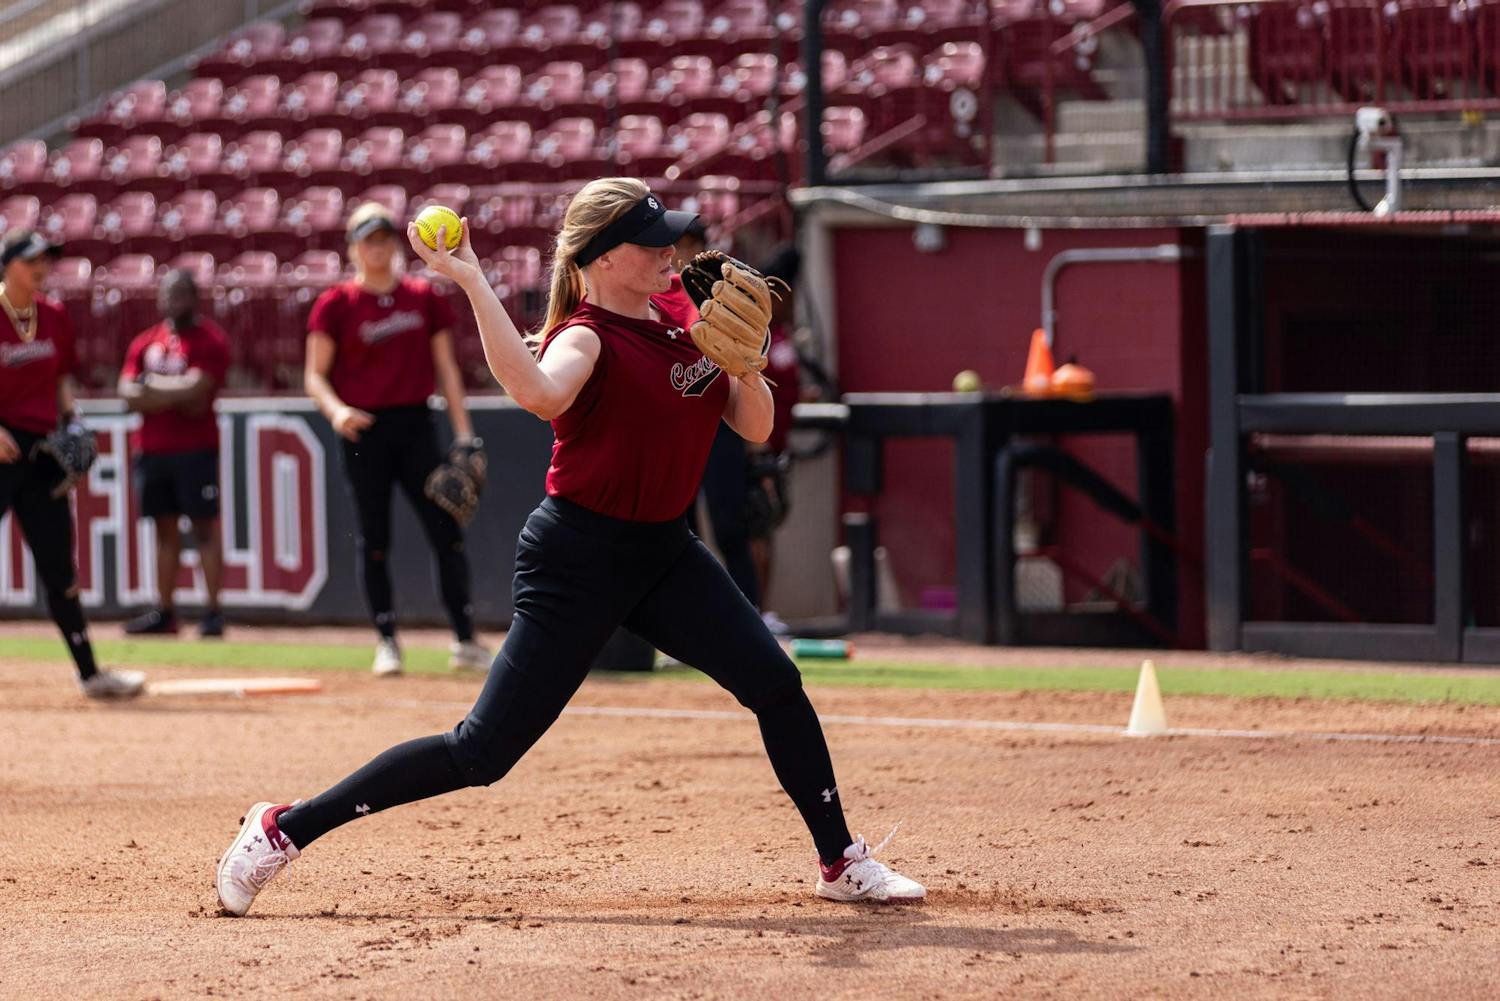 Fifth-year pitcher Alana Vawter throws the ball during a South Carolina softball practice. Vawter previously played at Stanford University, where she finished her four years within the top-five in wins, shutouts, strikeouts and innings pitched.